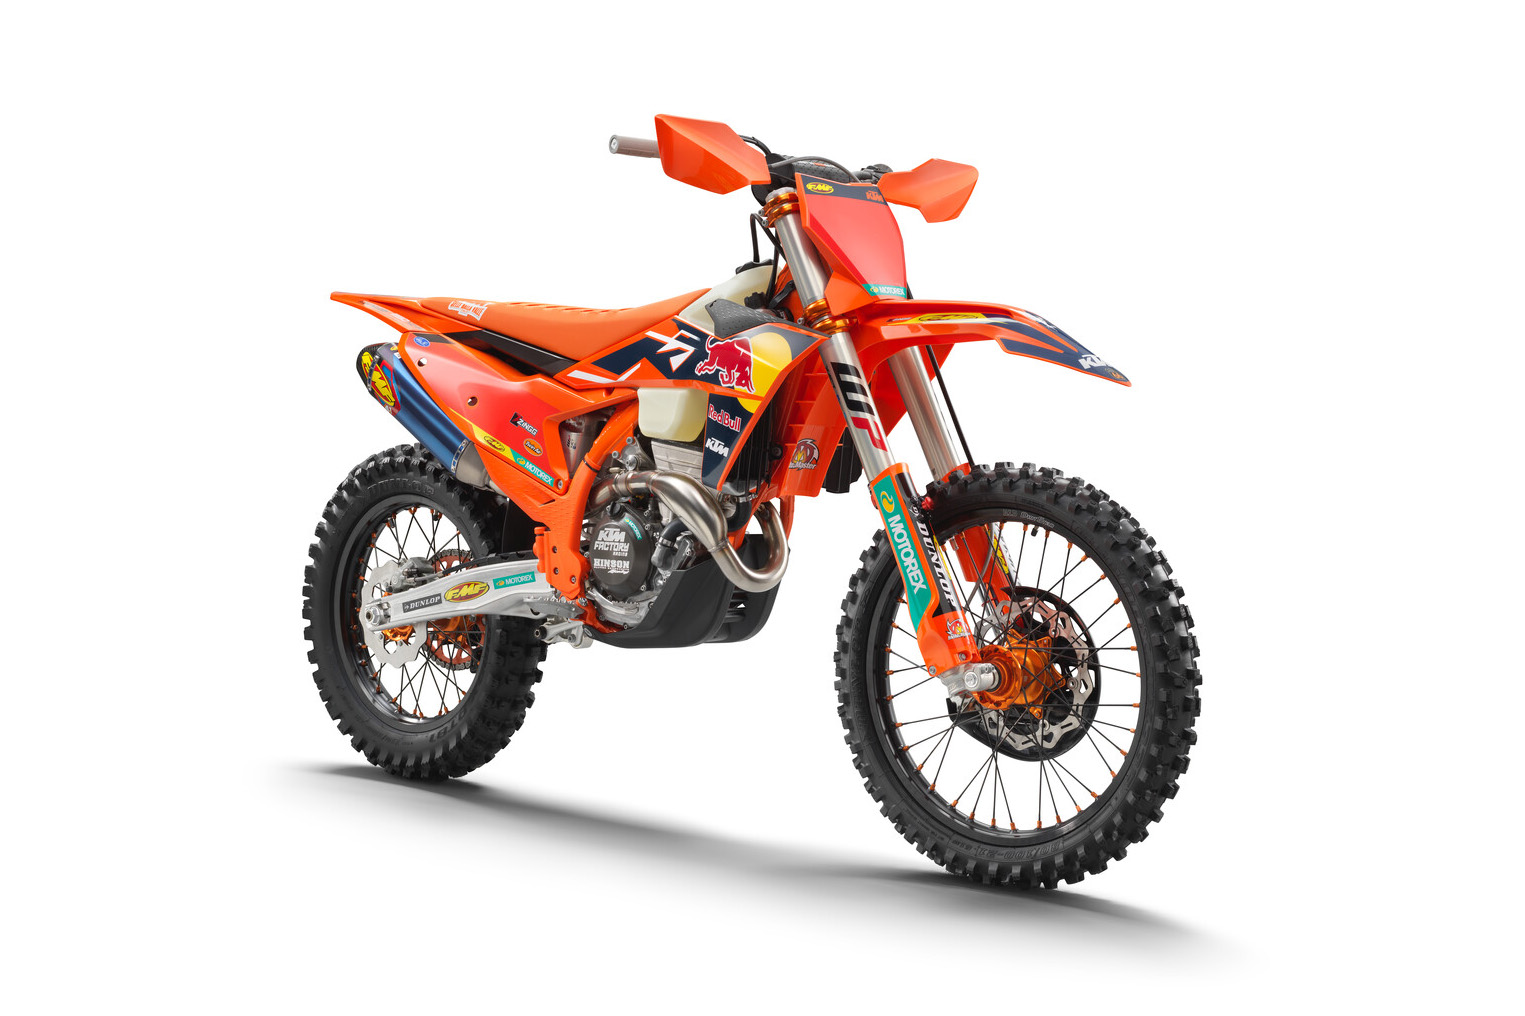 First look: KTM USA announce 2023 KTM 350 XC-F Factory Edition